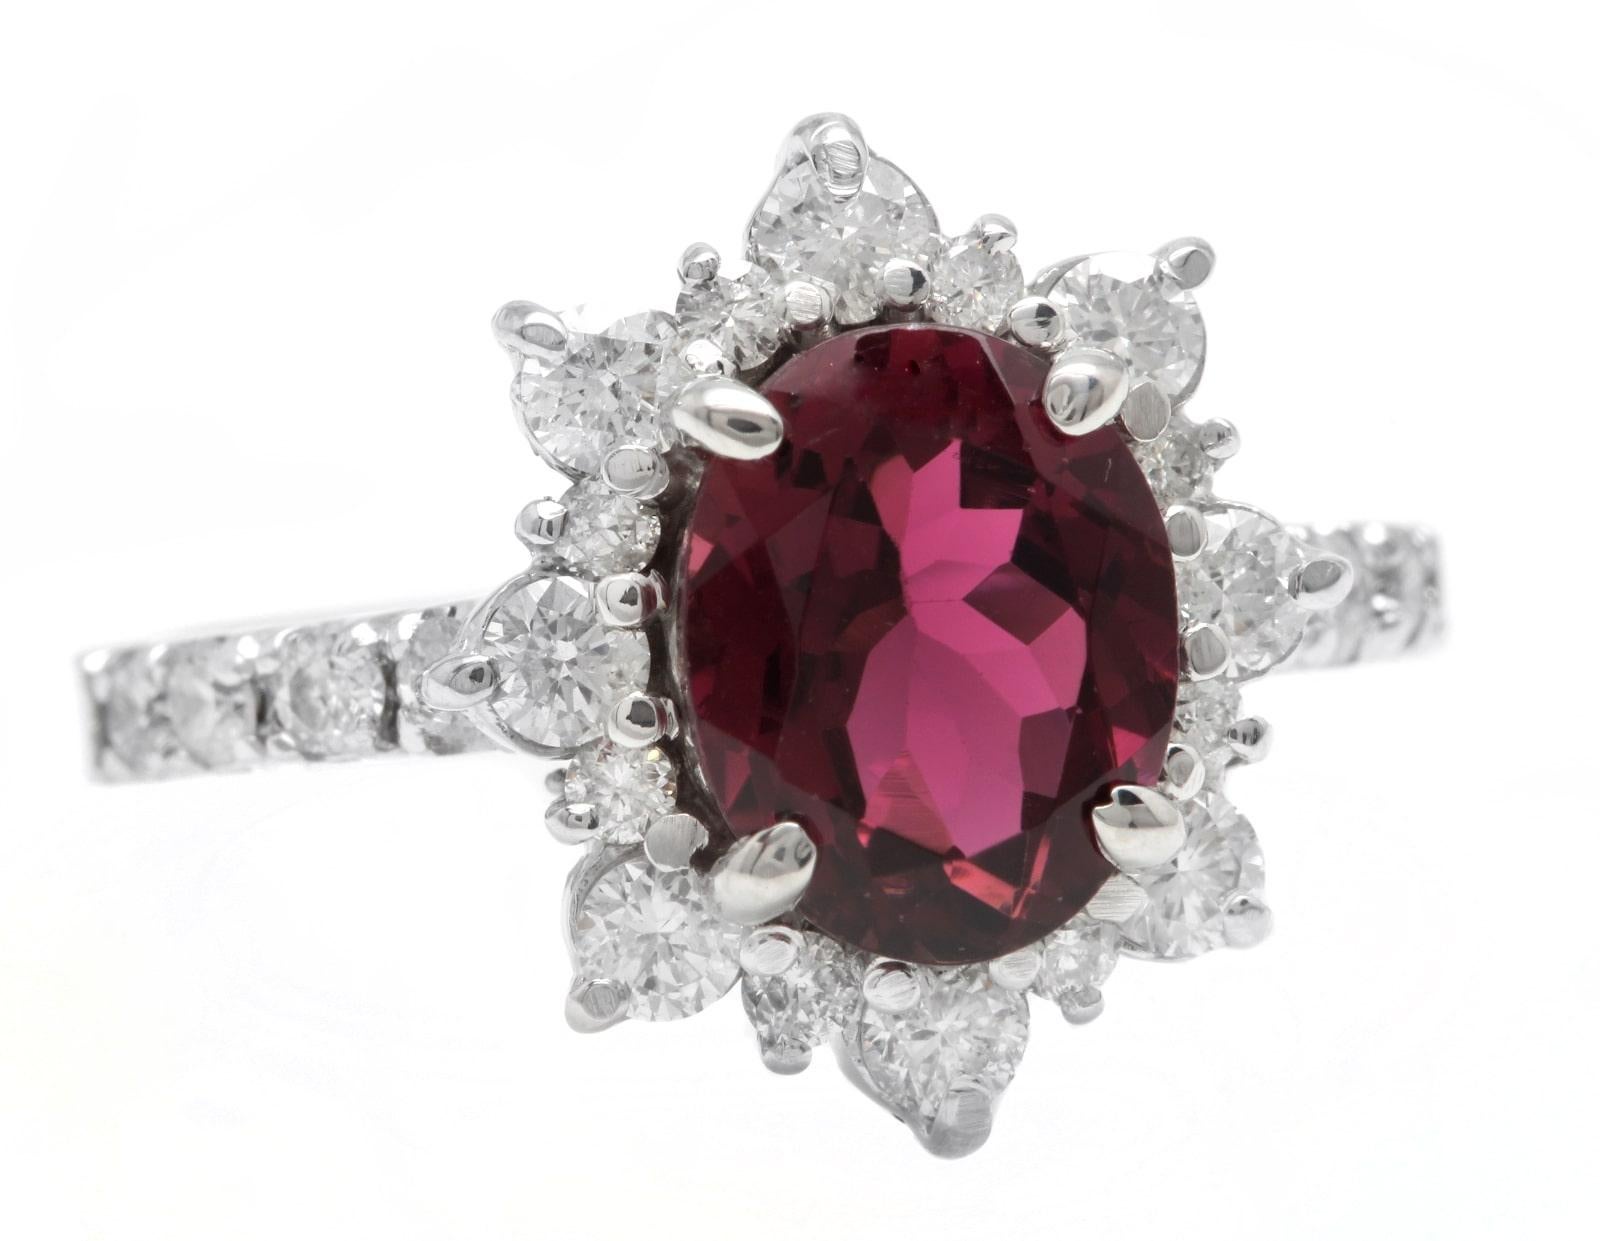 2.80 Carats Natural Very Nice Looking Tourmaline and Diamond 14K Solid White Gold Ring

Suggested Replacement Value:  $5,500.00

Total Natural Oval Cut Tourmaline Weight is: Approx. 2.00 Carats

Tourmaline Measures: Approx. 9.00 x 7.00mm

Natural